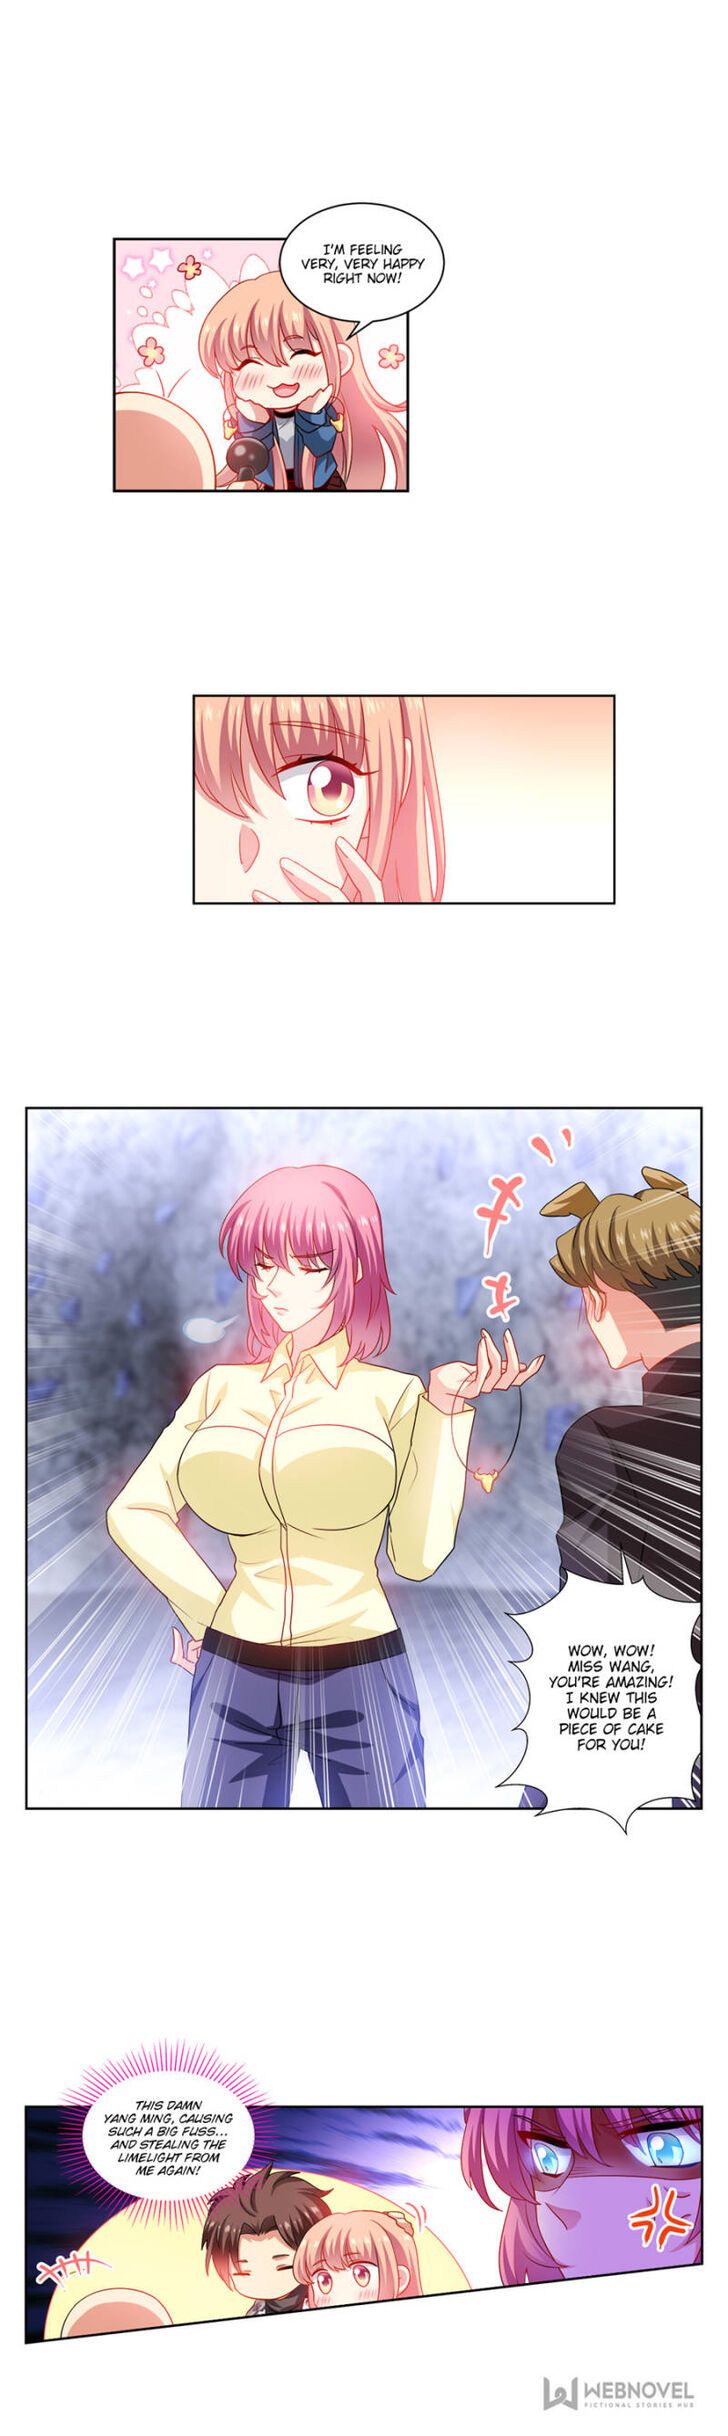 So Pure, So Flirtatious ( Very Pure ) Chapter 273 page 5